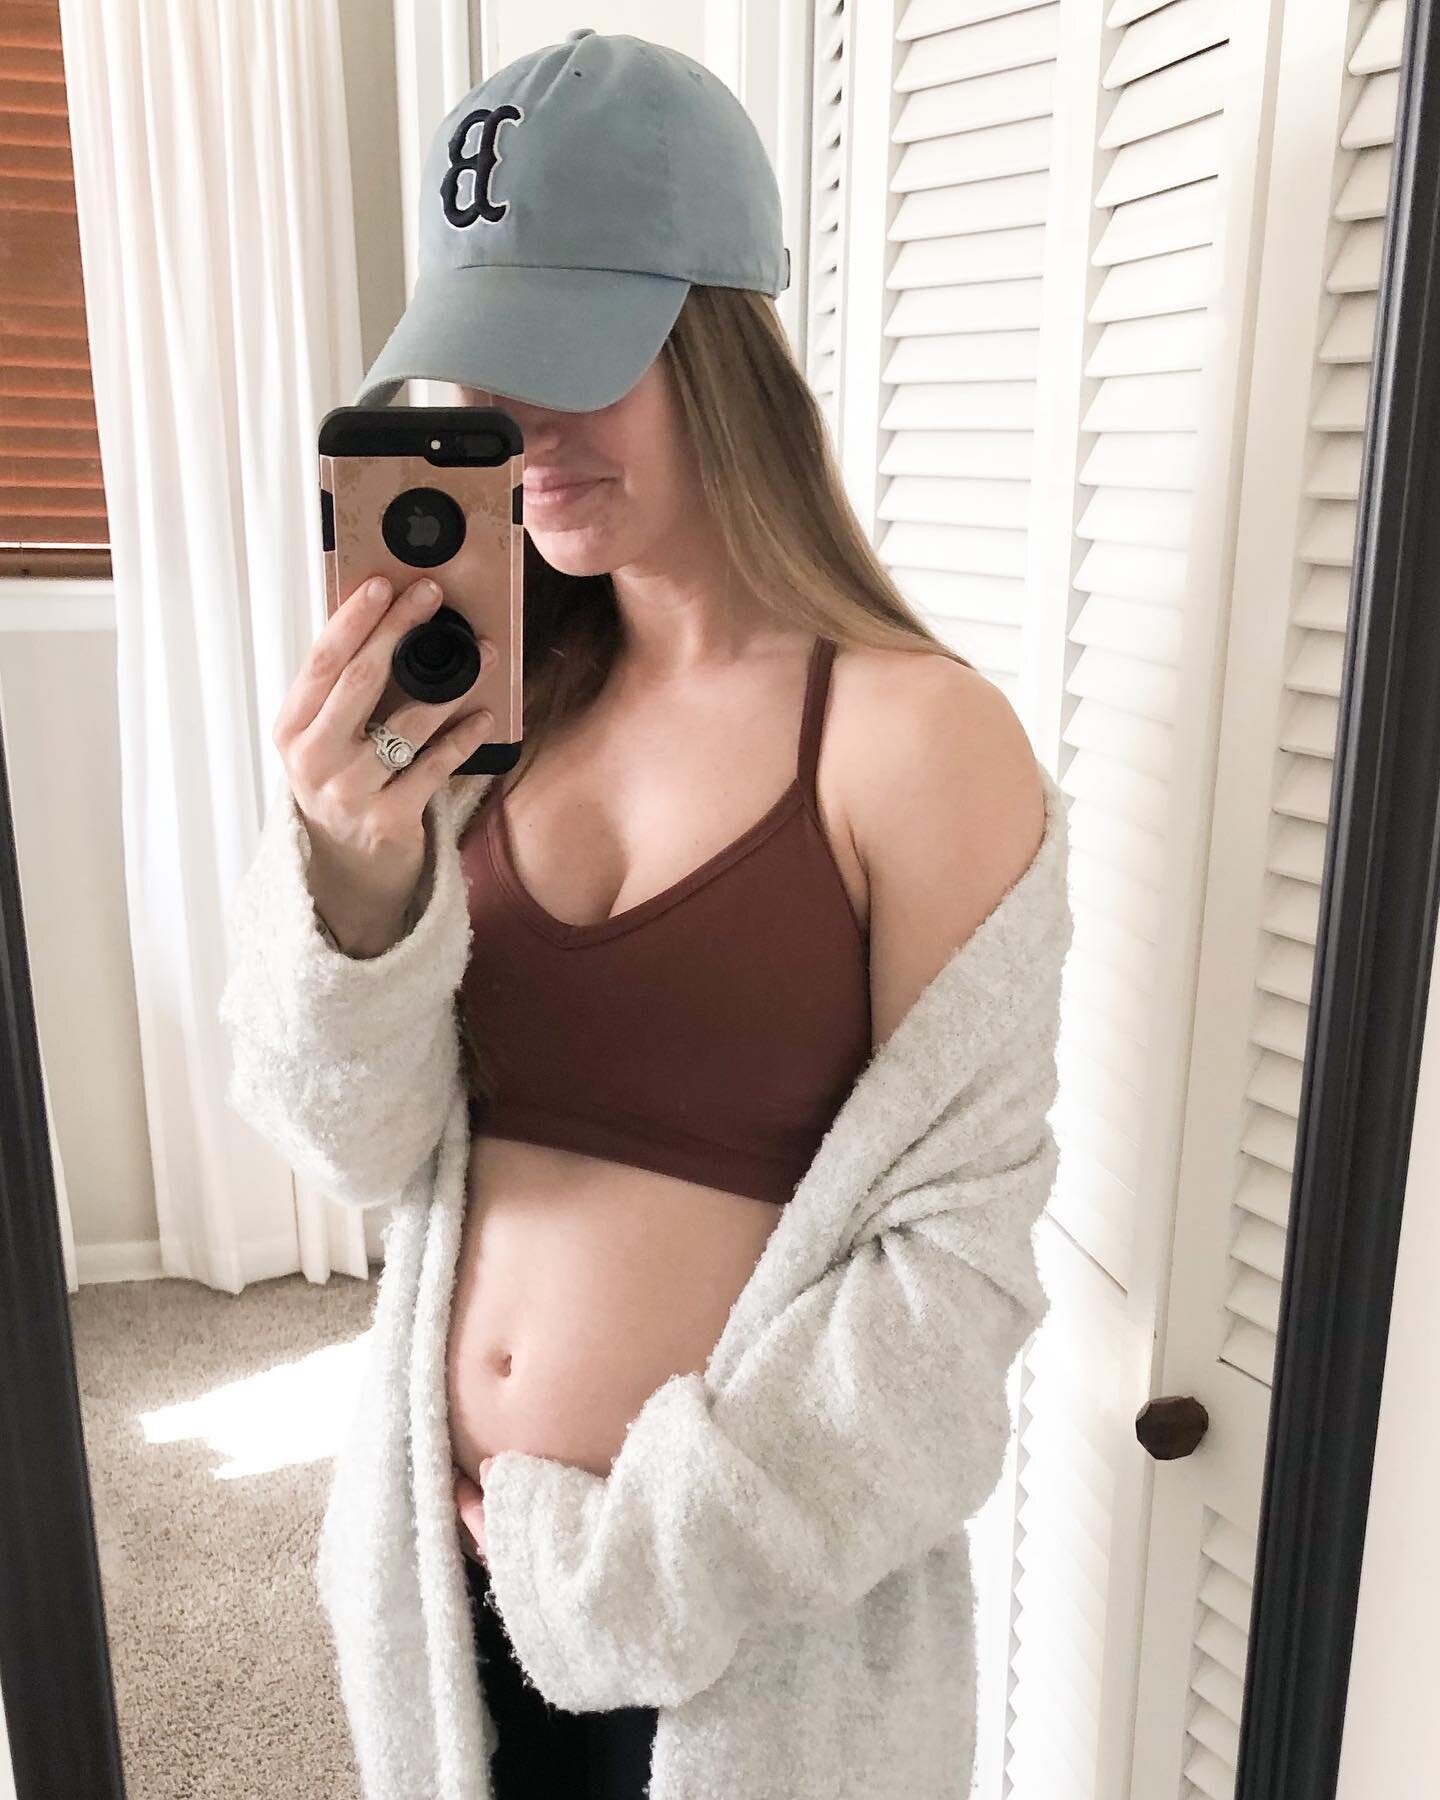 pants are gettin tight + im here for it 🤟
&bull;
&bull;
&bull;
i never thought id be so ecstatic to be a girl mom but I truly can&rsquo;t wait for this little bit to get here so her dad + i can snuggle her. also taking every bump pic in a @redsox ha